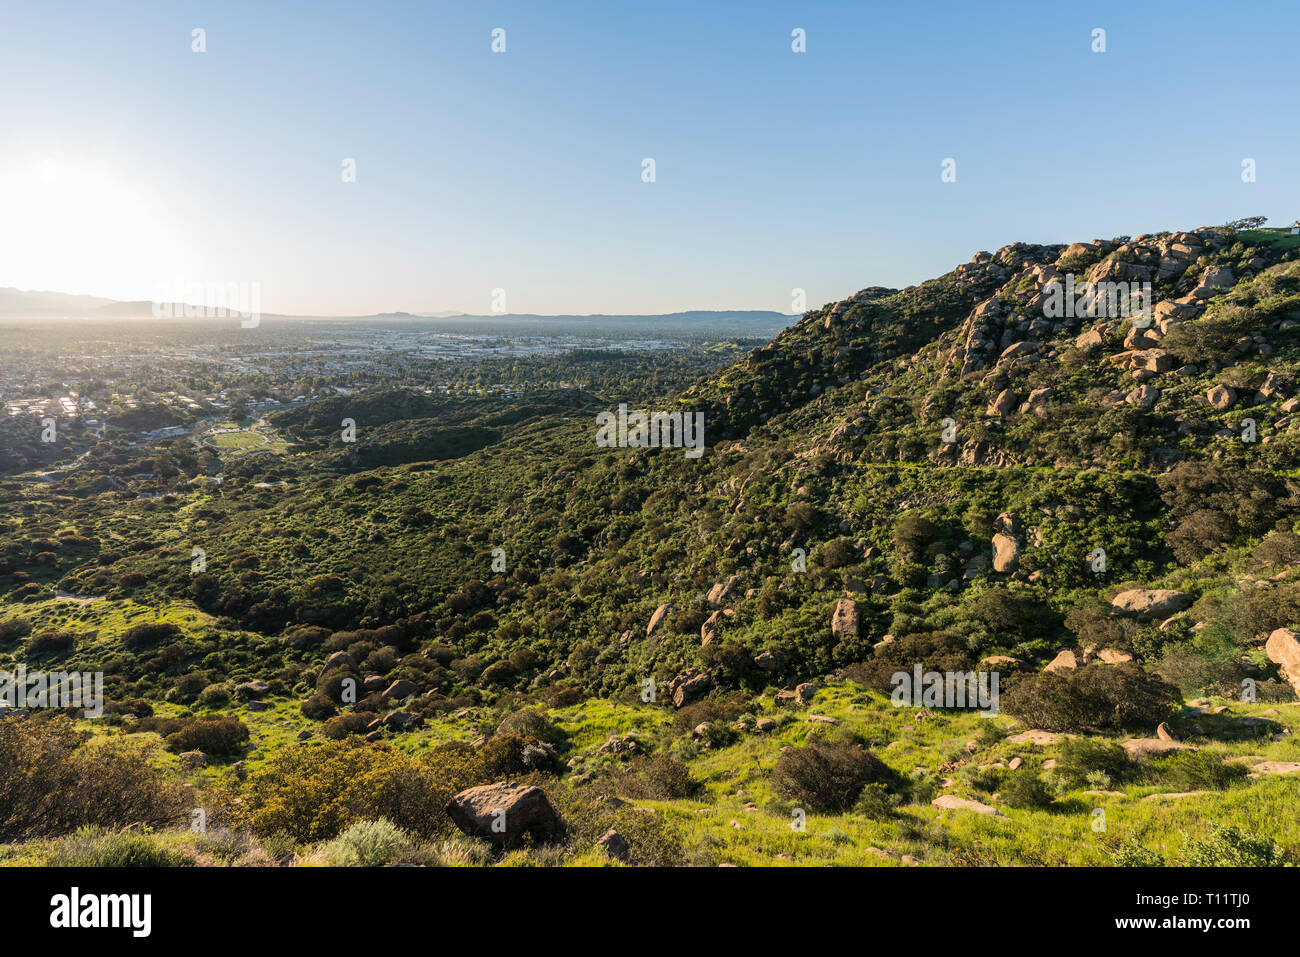 Early spring morning view of Los Angeles and the San Fernando Valley from hilltop at Santa Susana Pass State Historic Park. Stock Photo